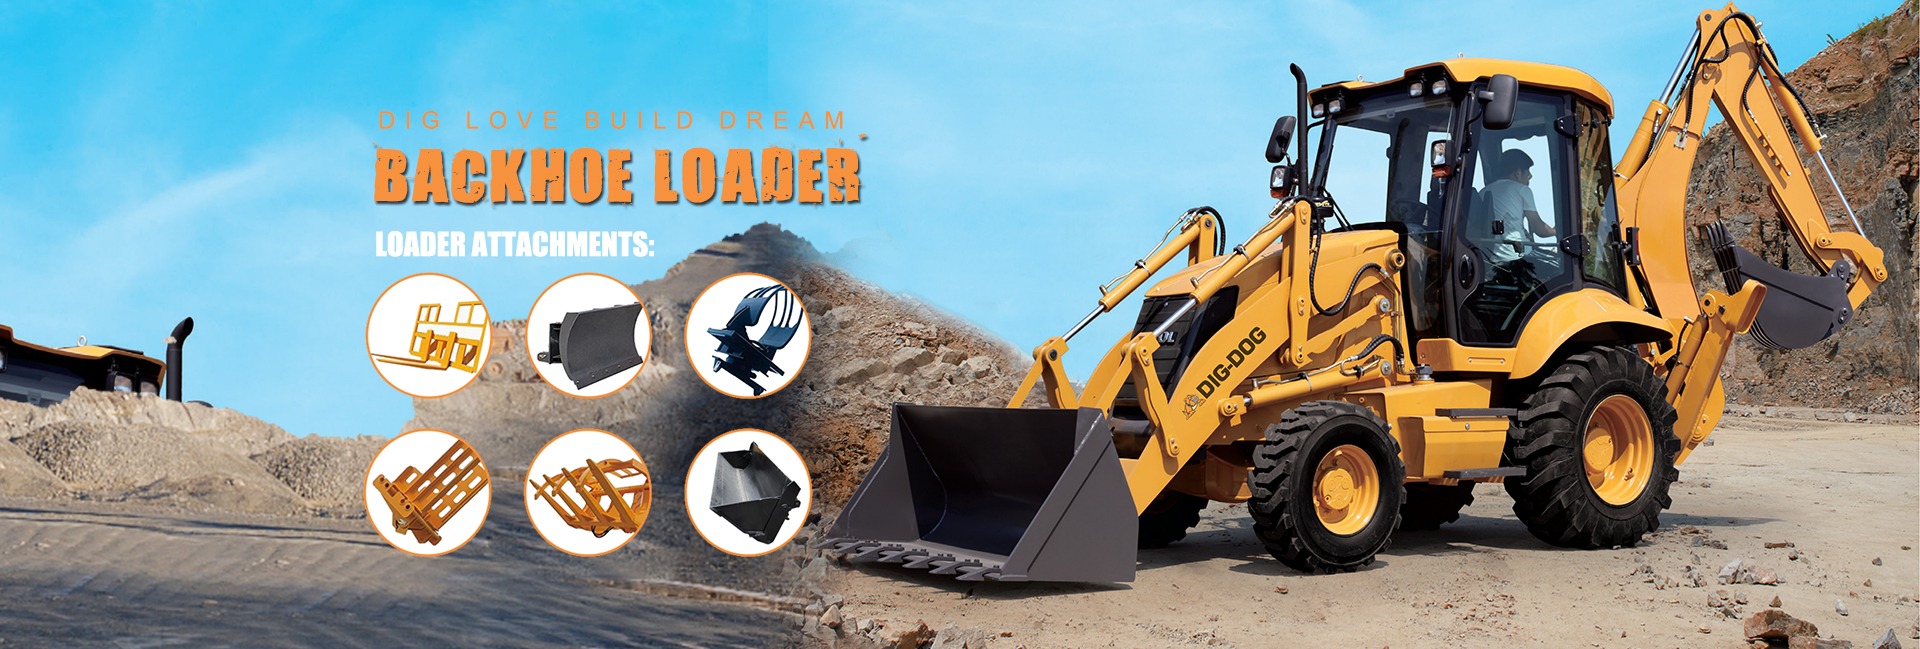 About Backhoe loaders and their functions